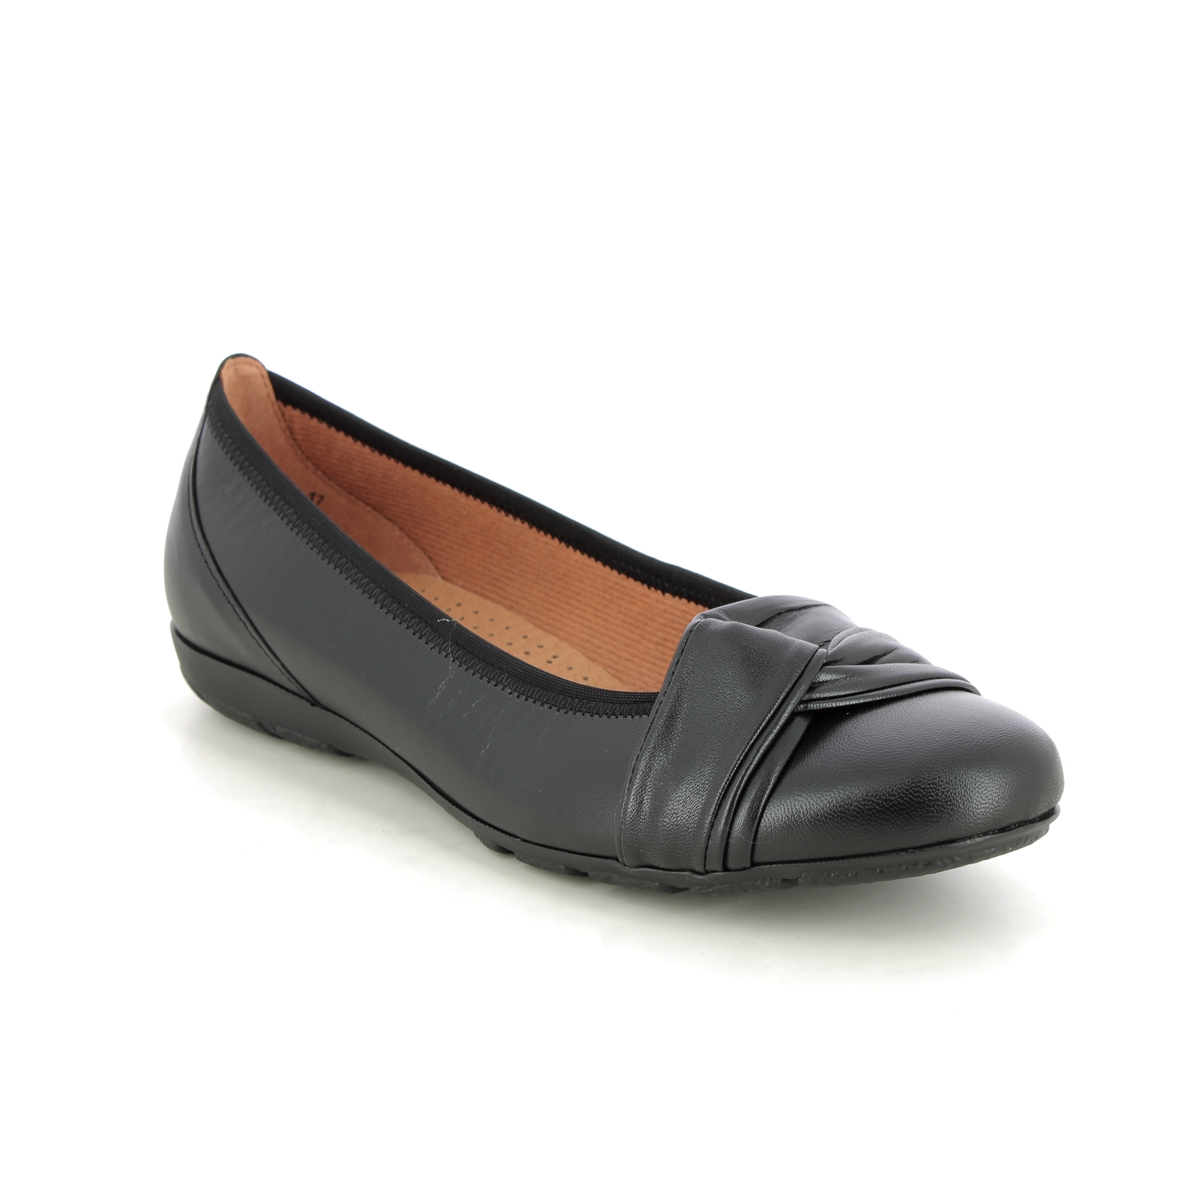 Gabor Racket Hovercraft Black leather Womens pumps 24.165.27 in a Plain Leather in Size 5